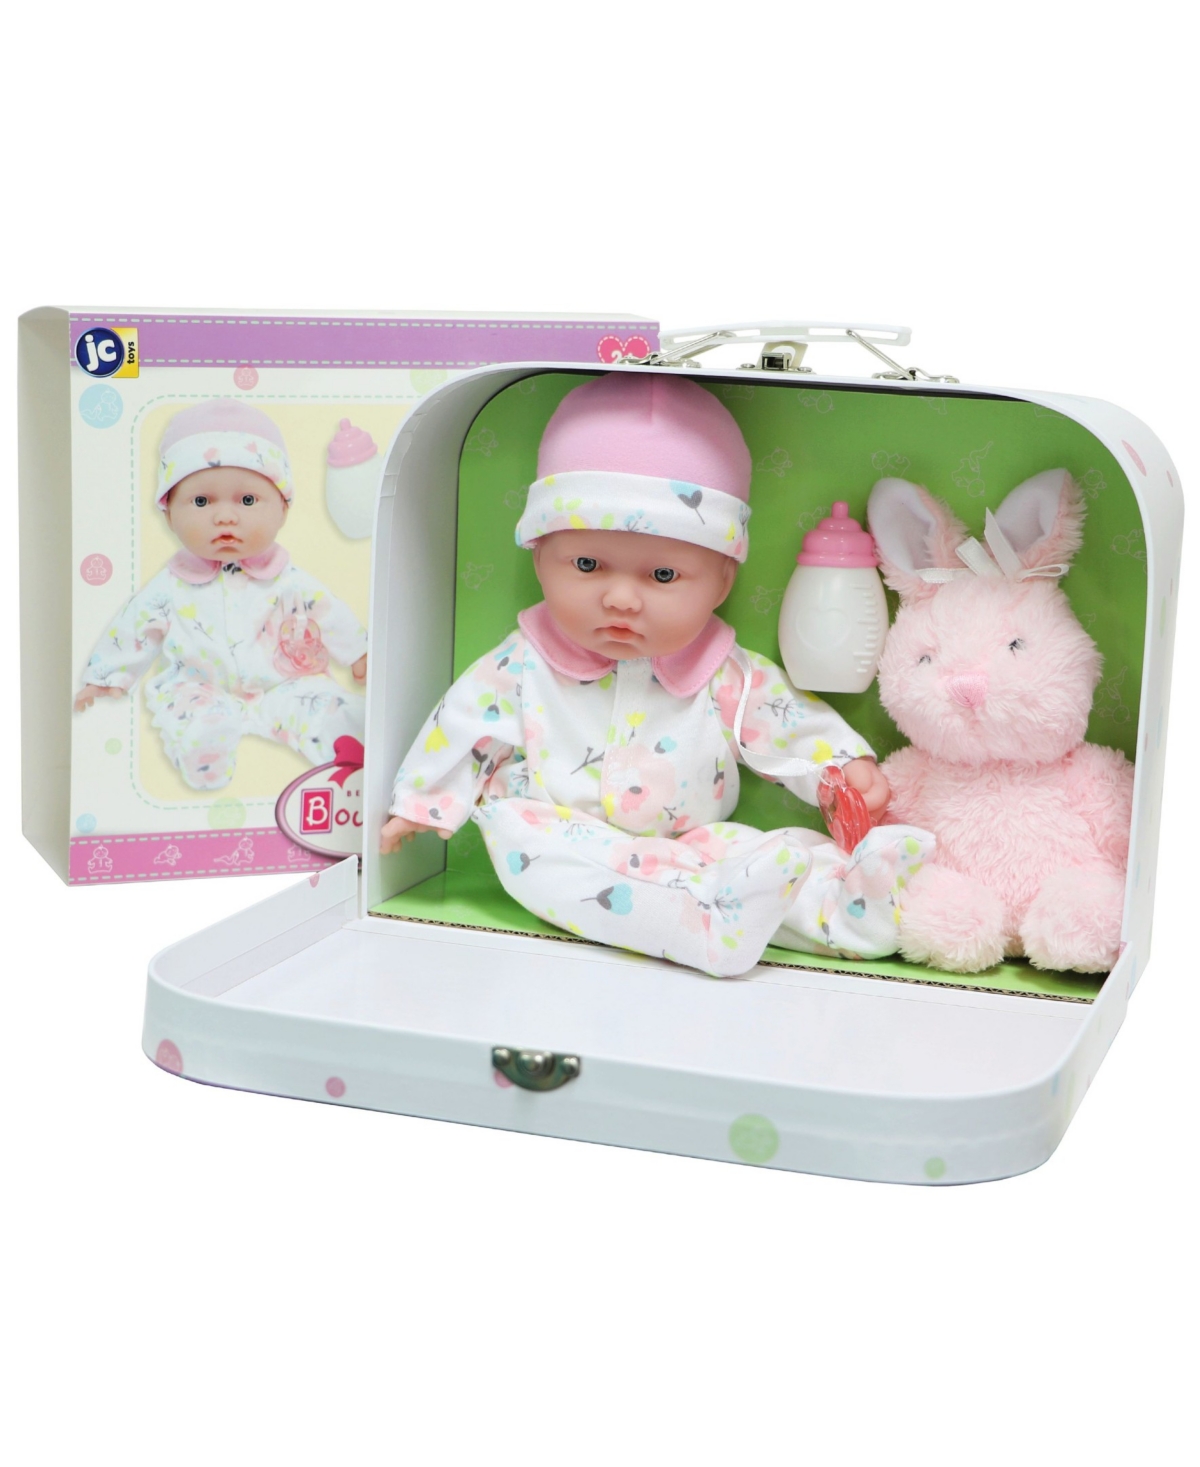 Jc Toys La Baby 11" Baby Doll Travel Case Gift Set, 7 Pieces In Pink